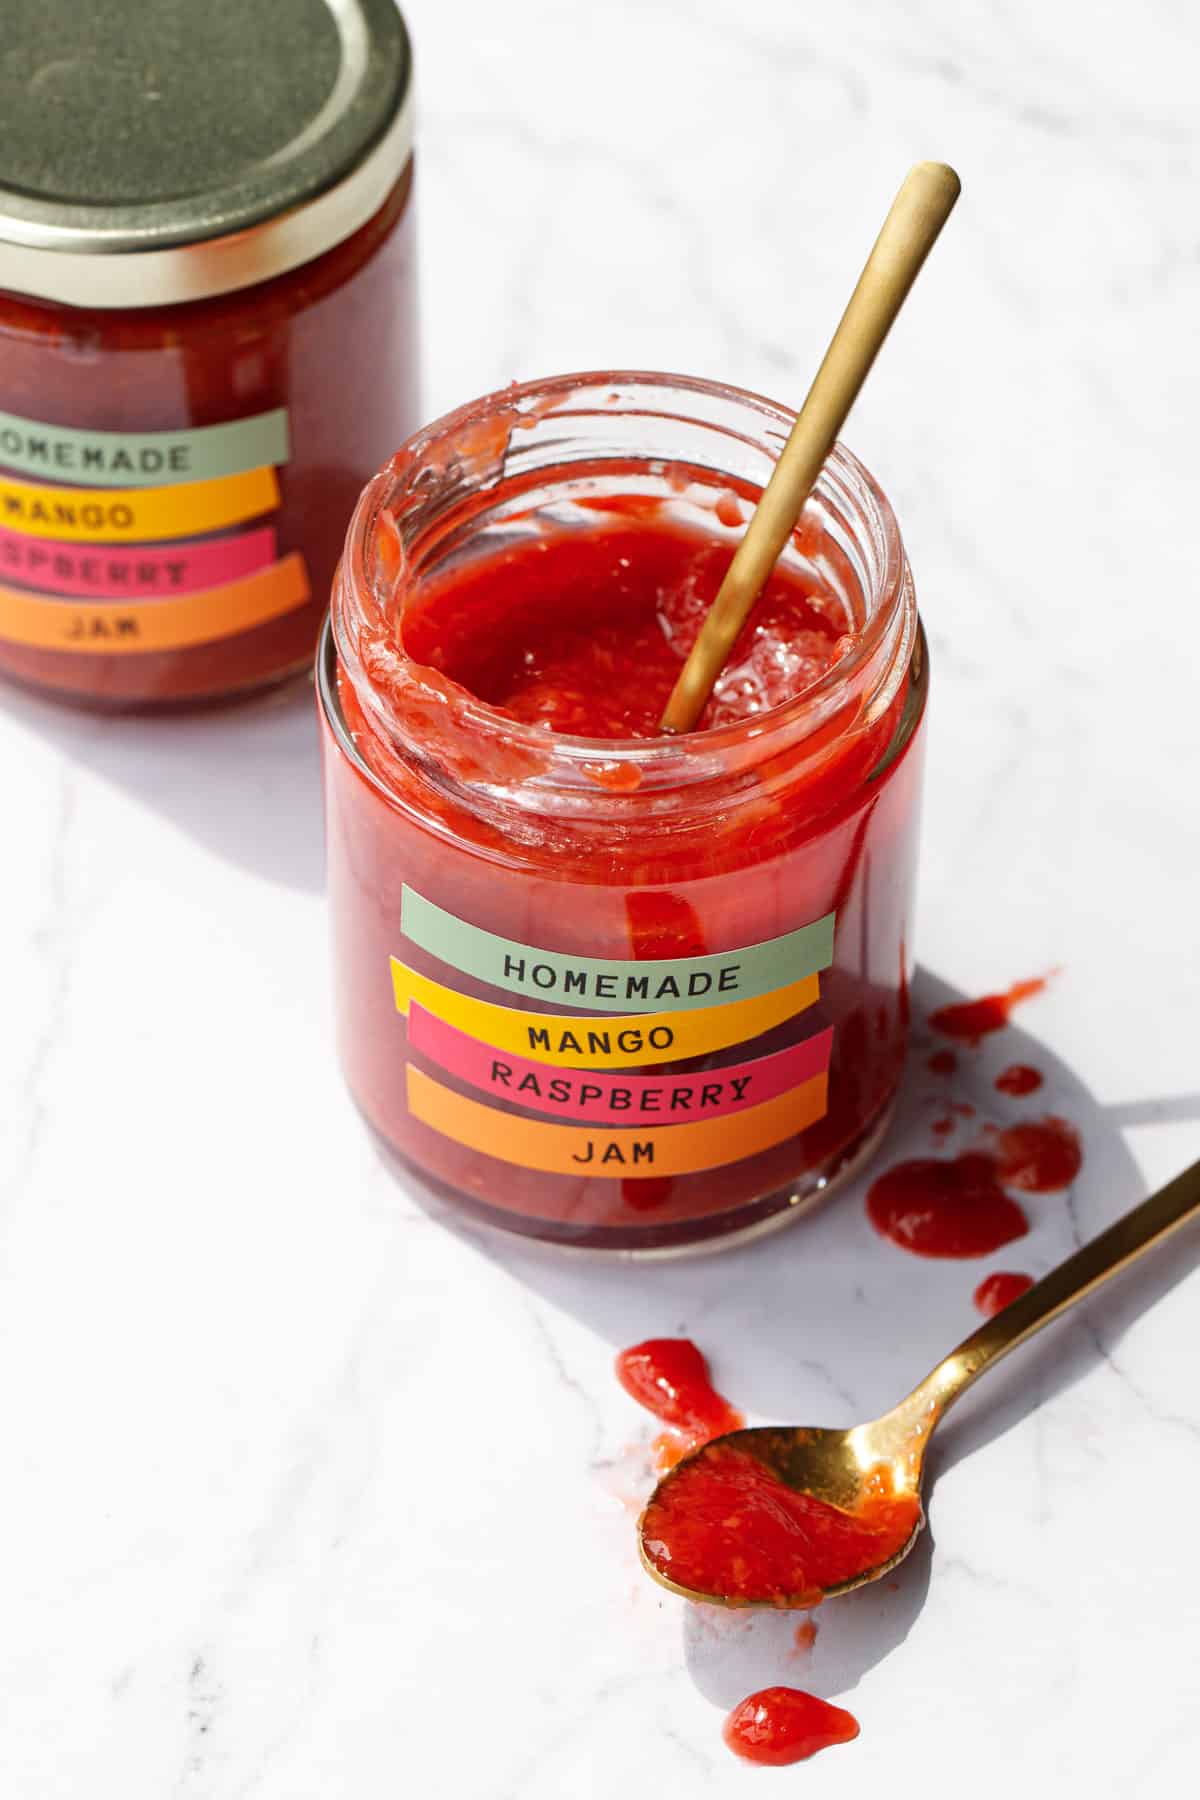 Two jars of Mango Raspberry Jam, gold spoon with spilled jam smeared on the marble background.